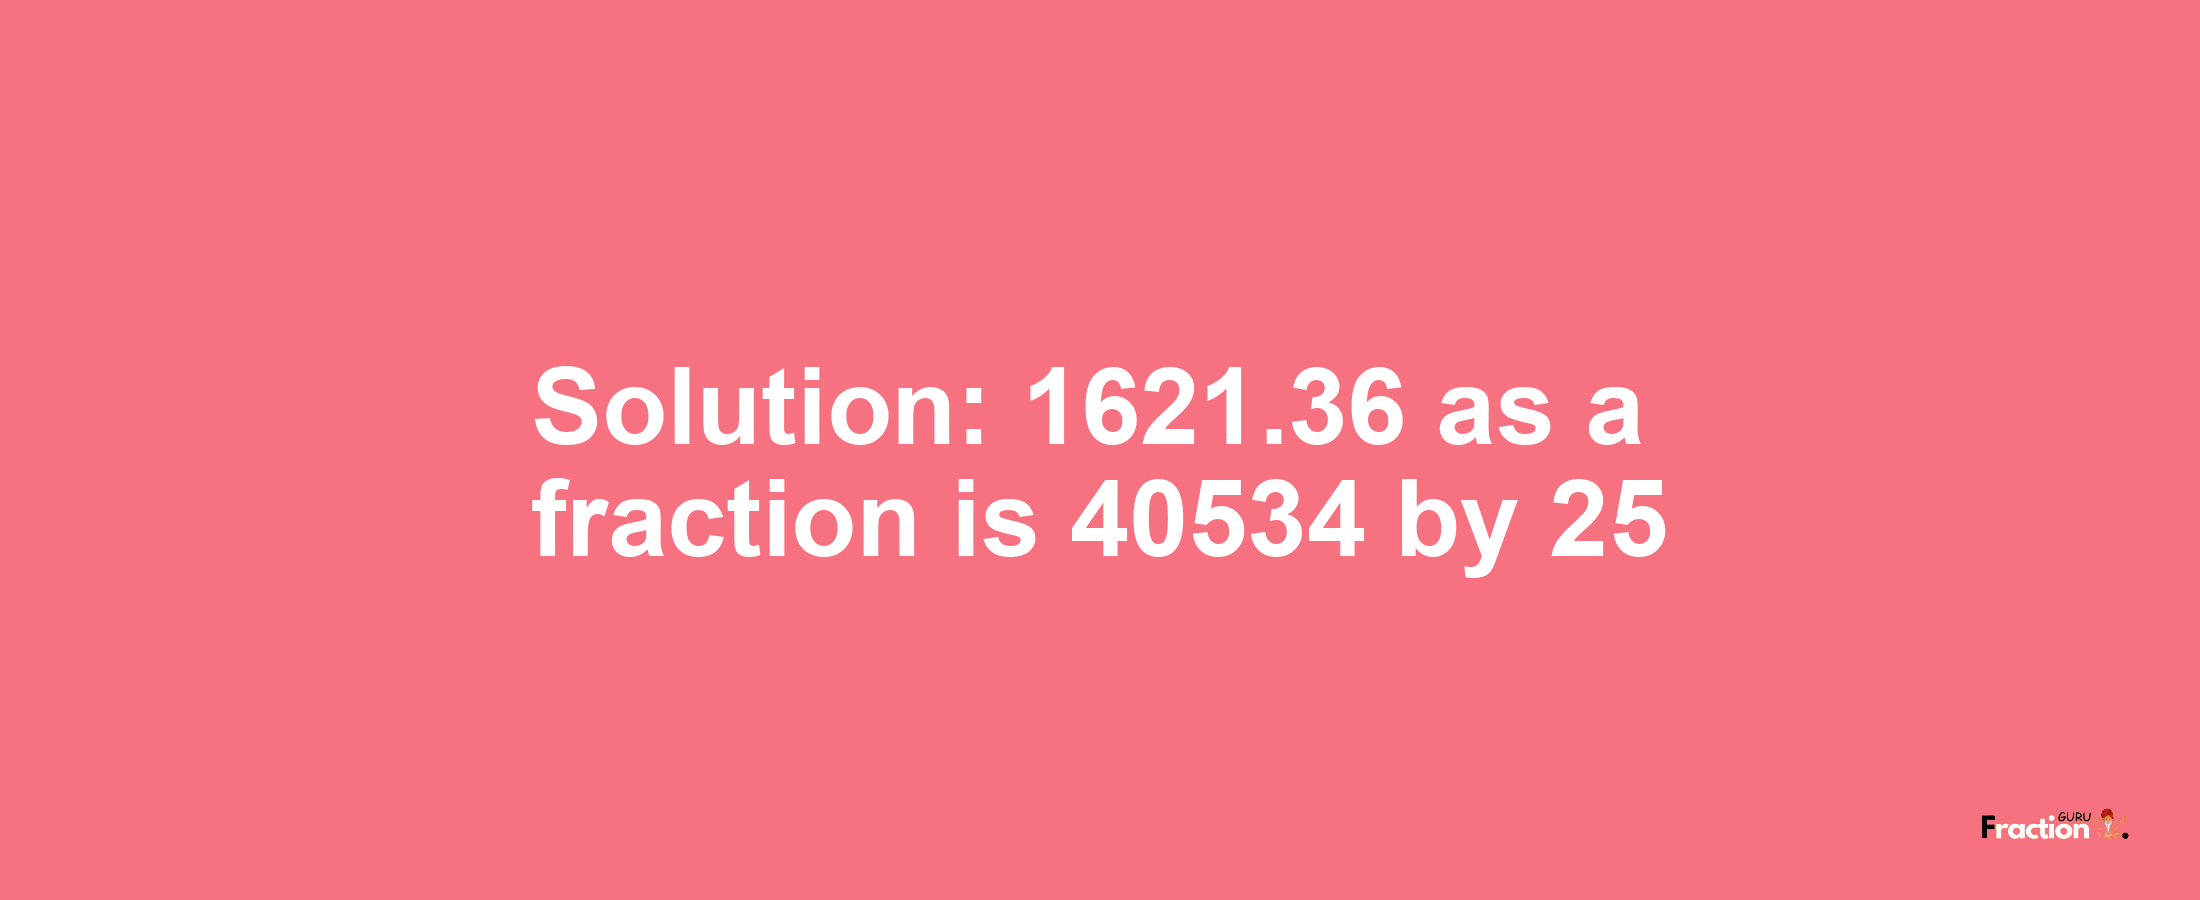 Solution:1621.36 as a fraction is 40534/25